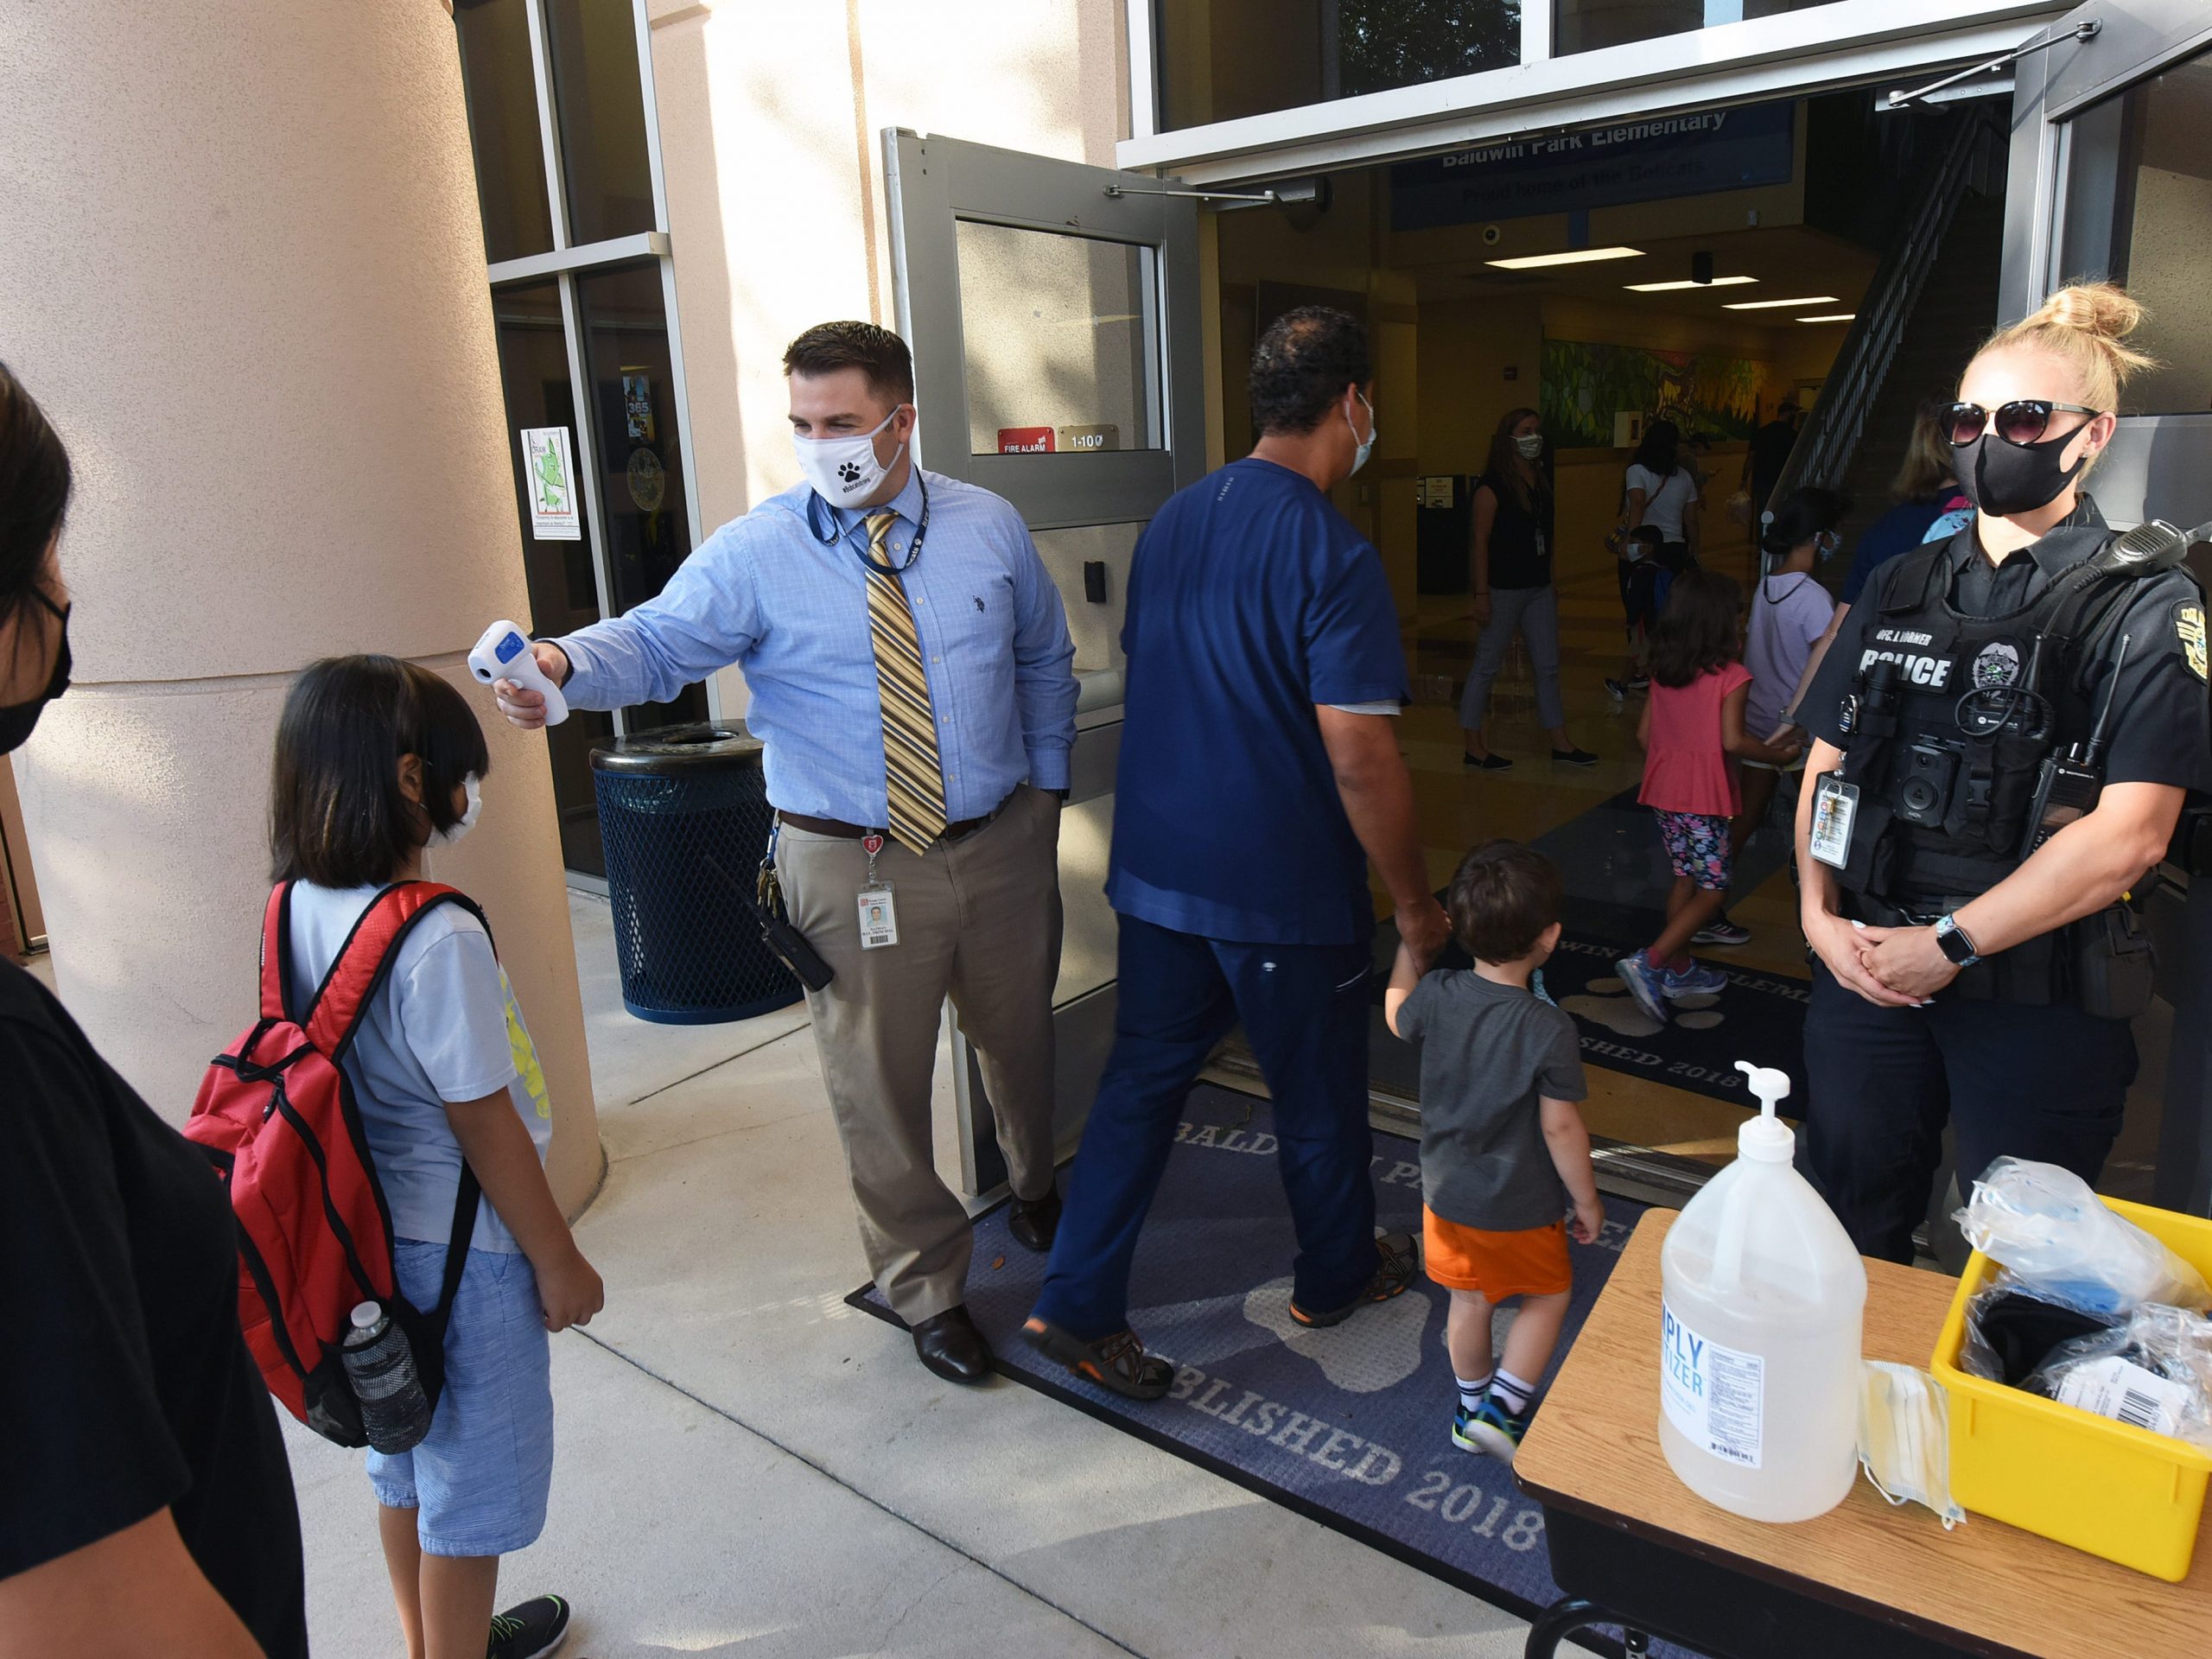 Principal Nathan Hay performs temperature checks on students as they arrive on the first day of classes for the 2021-22 school year at Baldwin Park Elementary School, August 10, 2021.